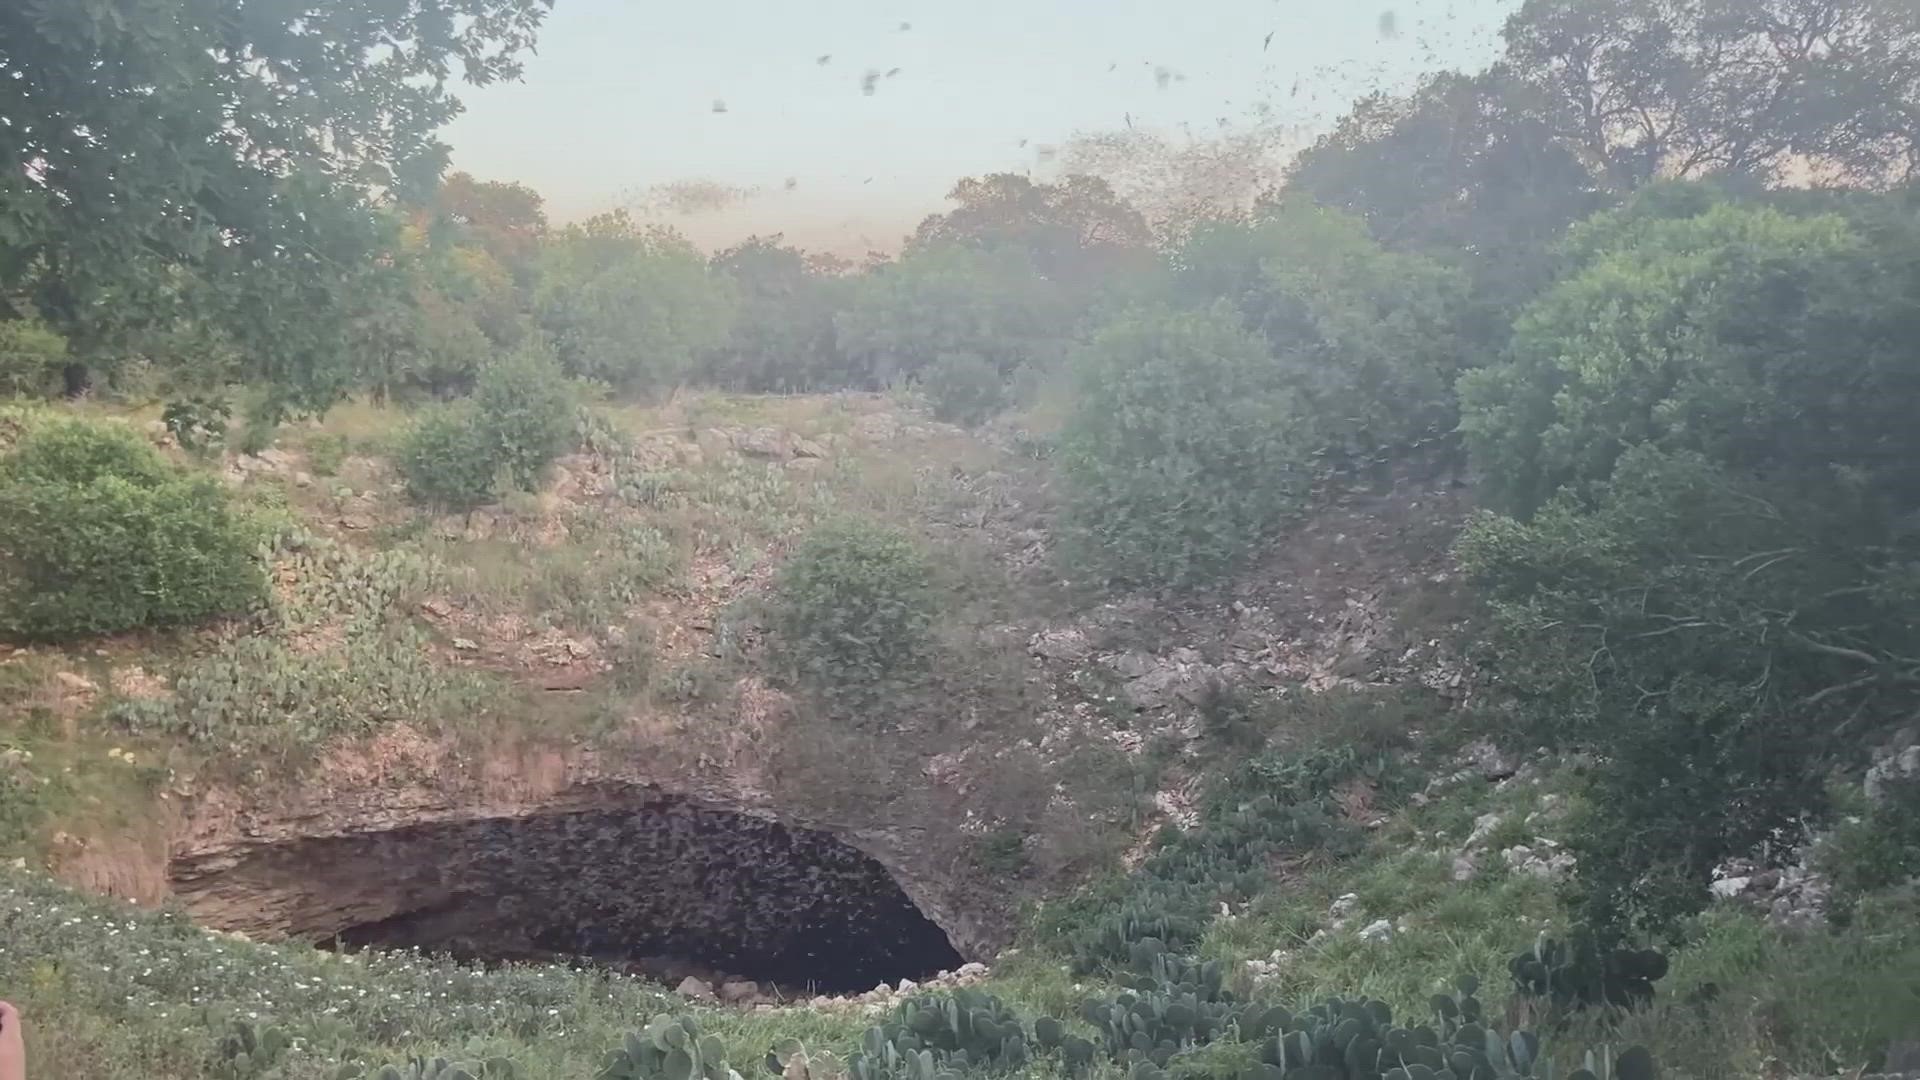 Millions of bats emerge every summer from the Bracken Cave Preserve.